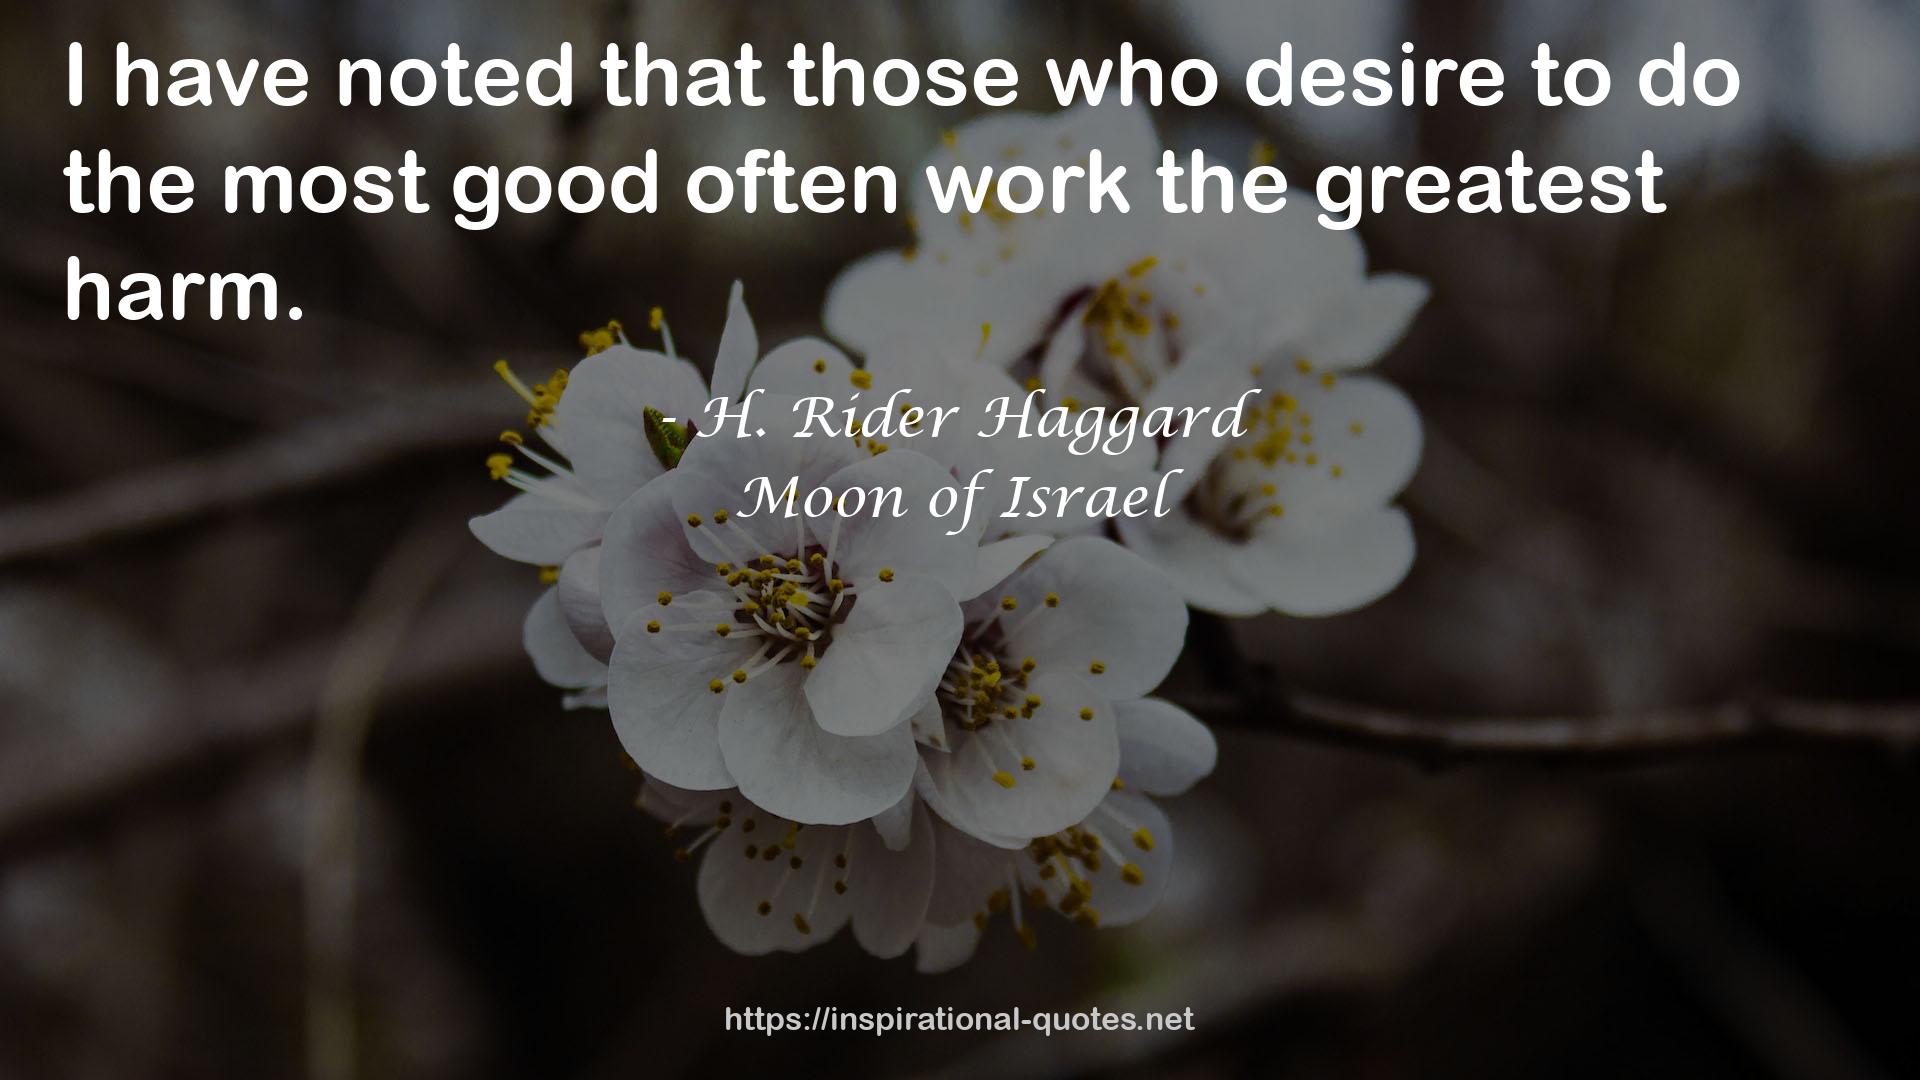 Moon of Israel QUOTES